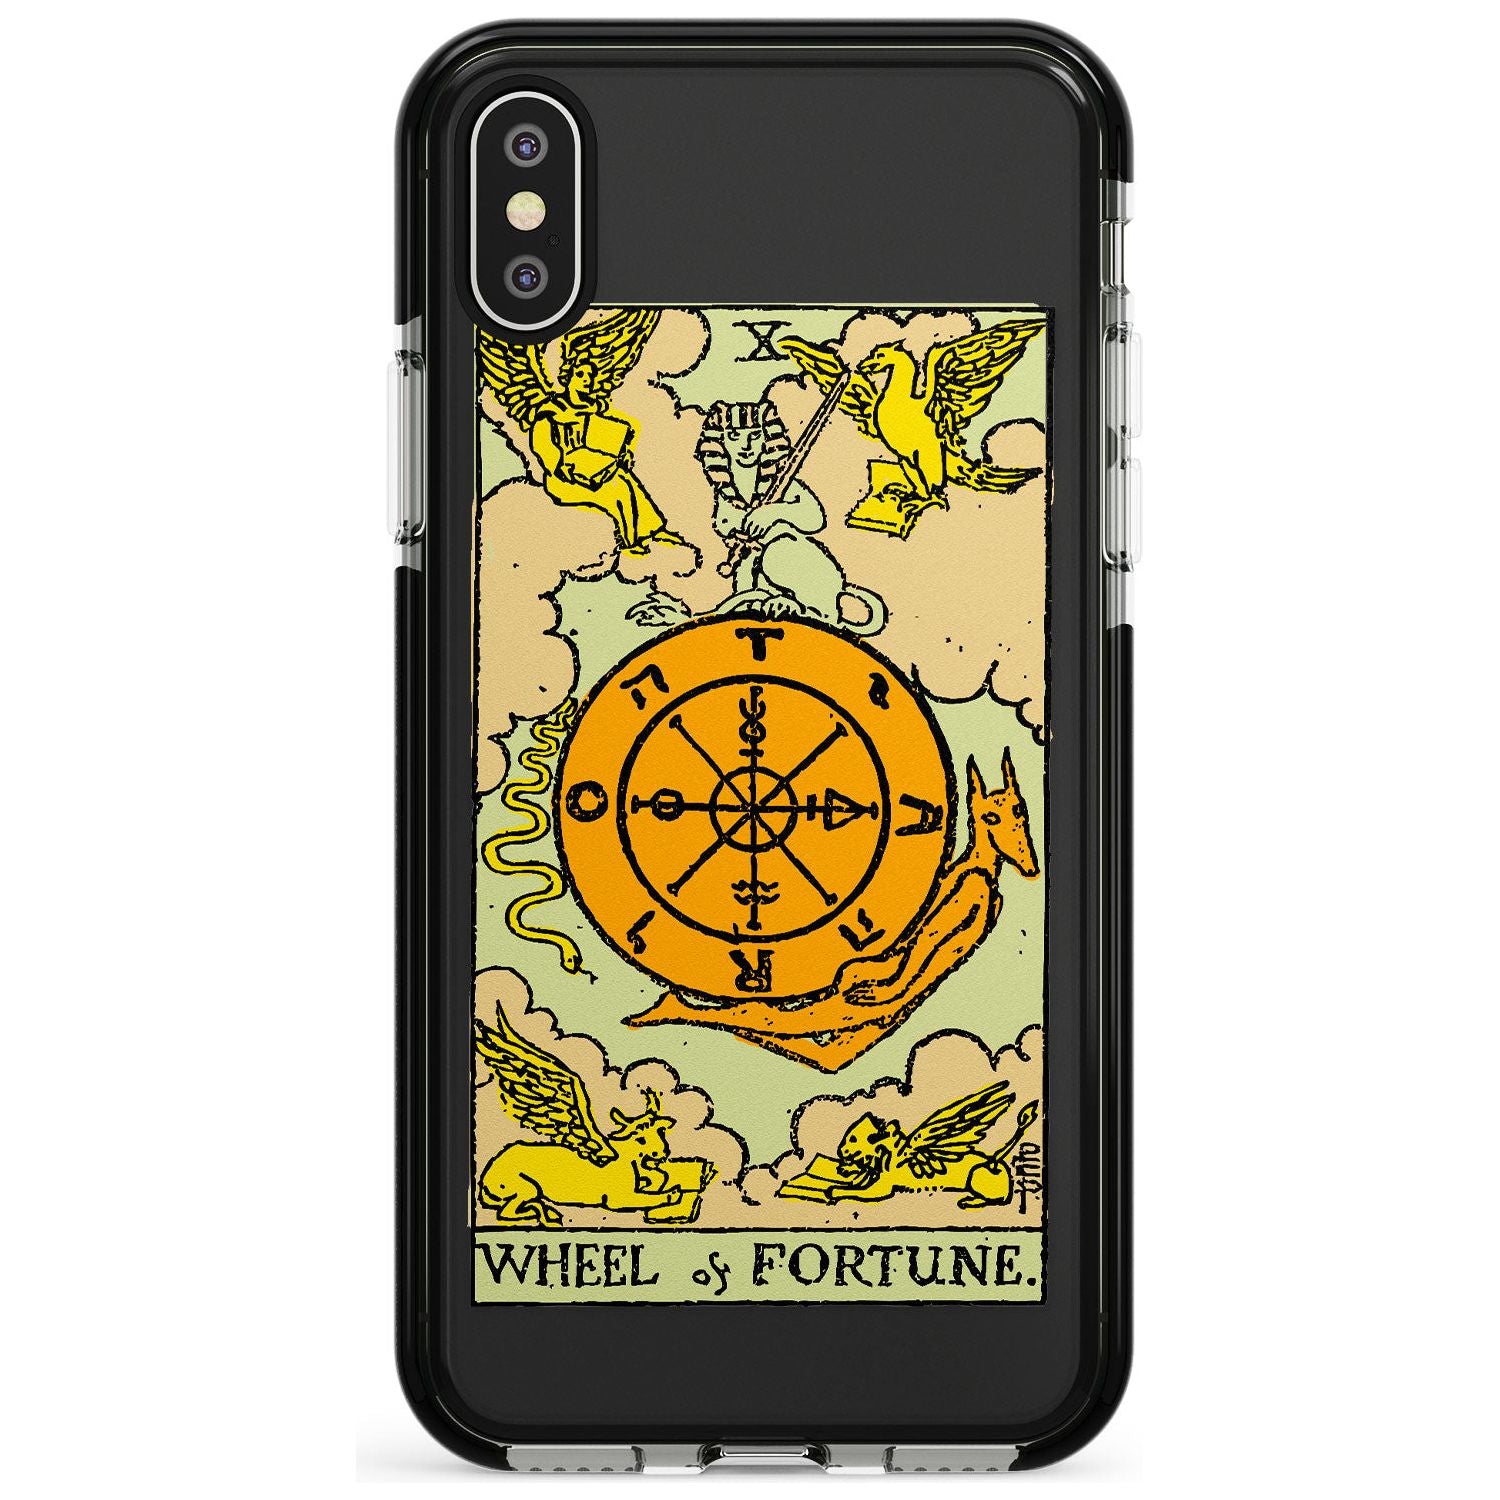 Wheel of Fortune Tarot Card - Colour Pink Fade Impact Phone Case for iPhone X XS Max XR